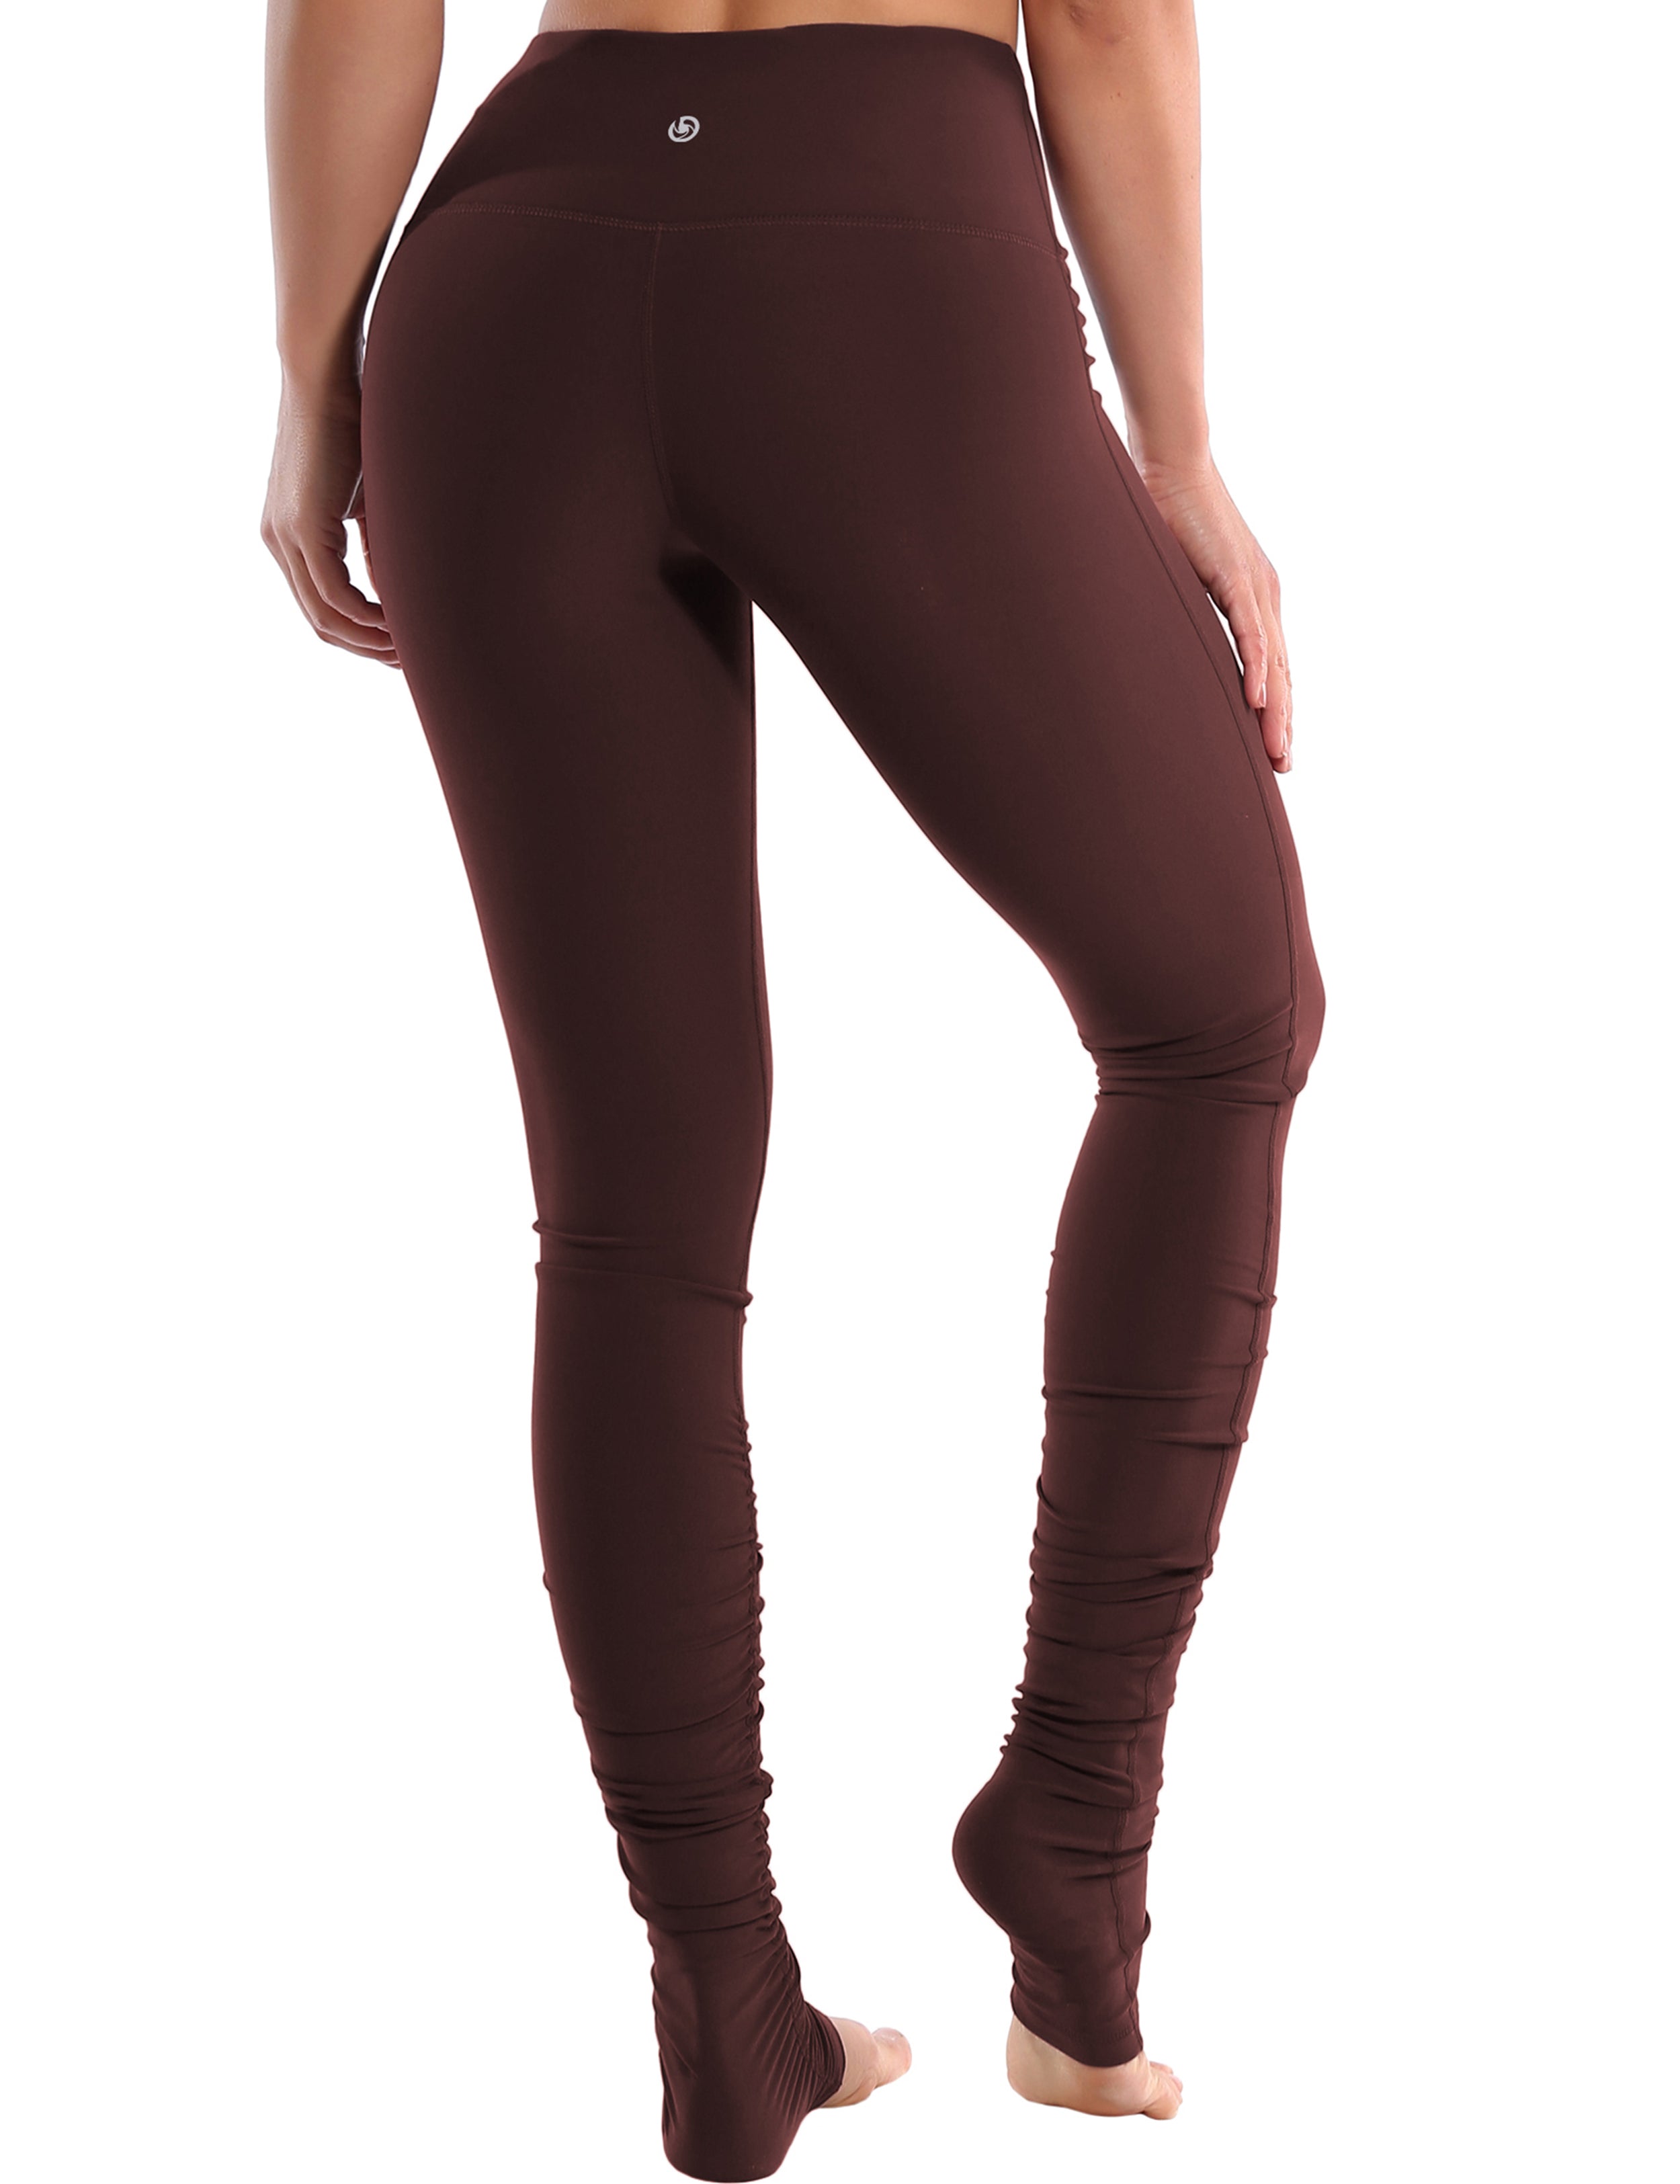 Over the Heel Pilates Pants mahoganymaroon Over the Heel Design 87%Nylon/13%Spandex Fabric doesn't attract lint easily 4-way stretch No see-through Moisture-wicking Tummy control